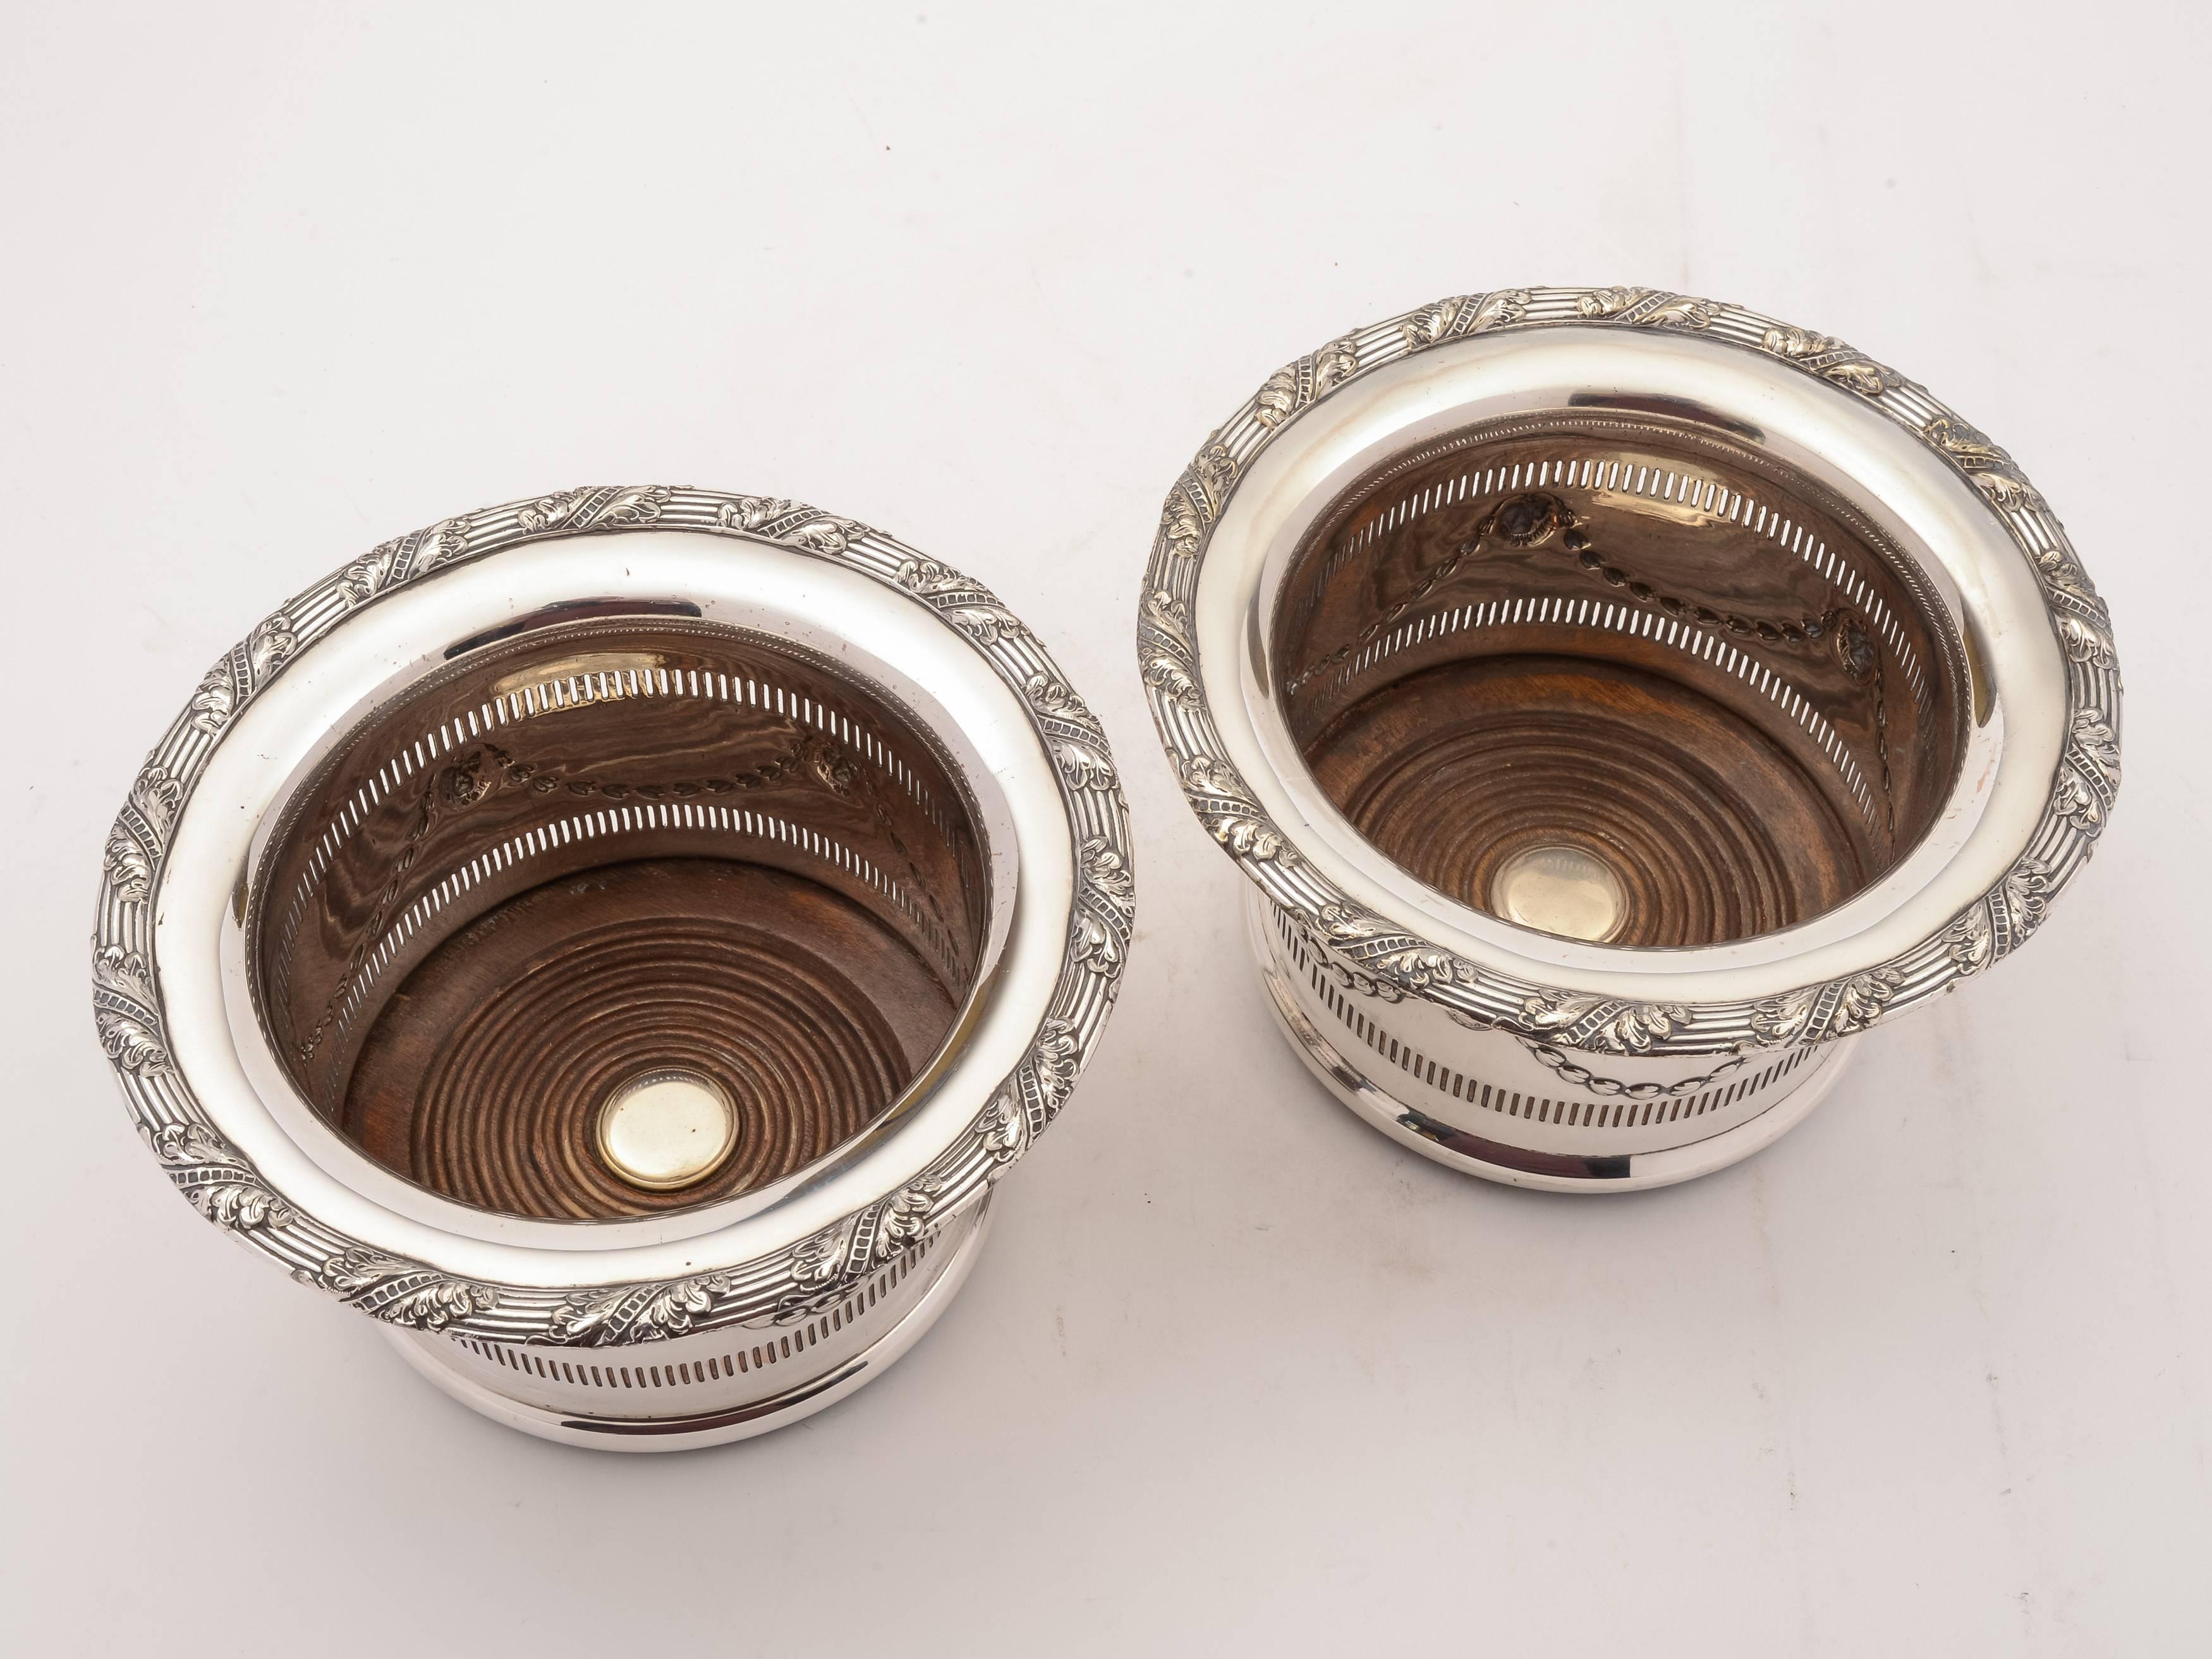 European Pair of Edwardian Silver Plated Champagne Coasters, circa 1905 For Sale